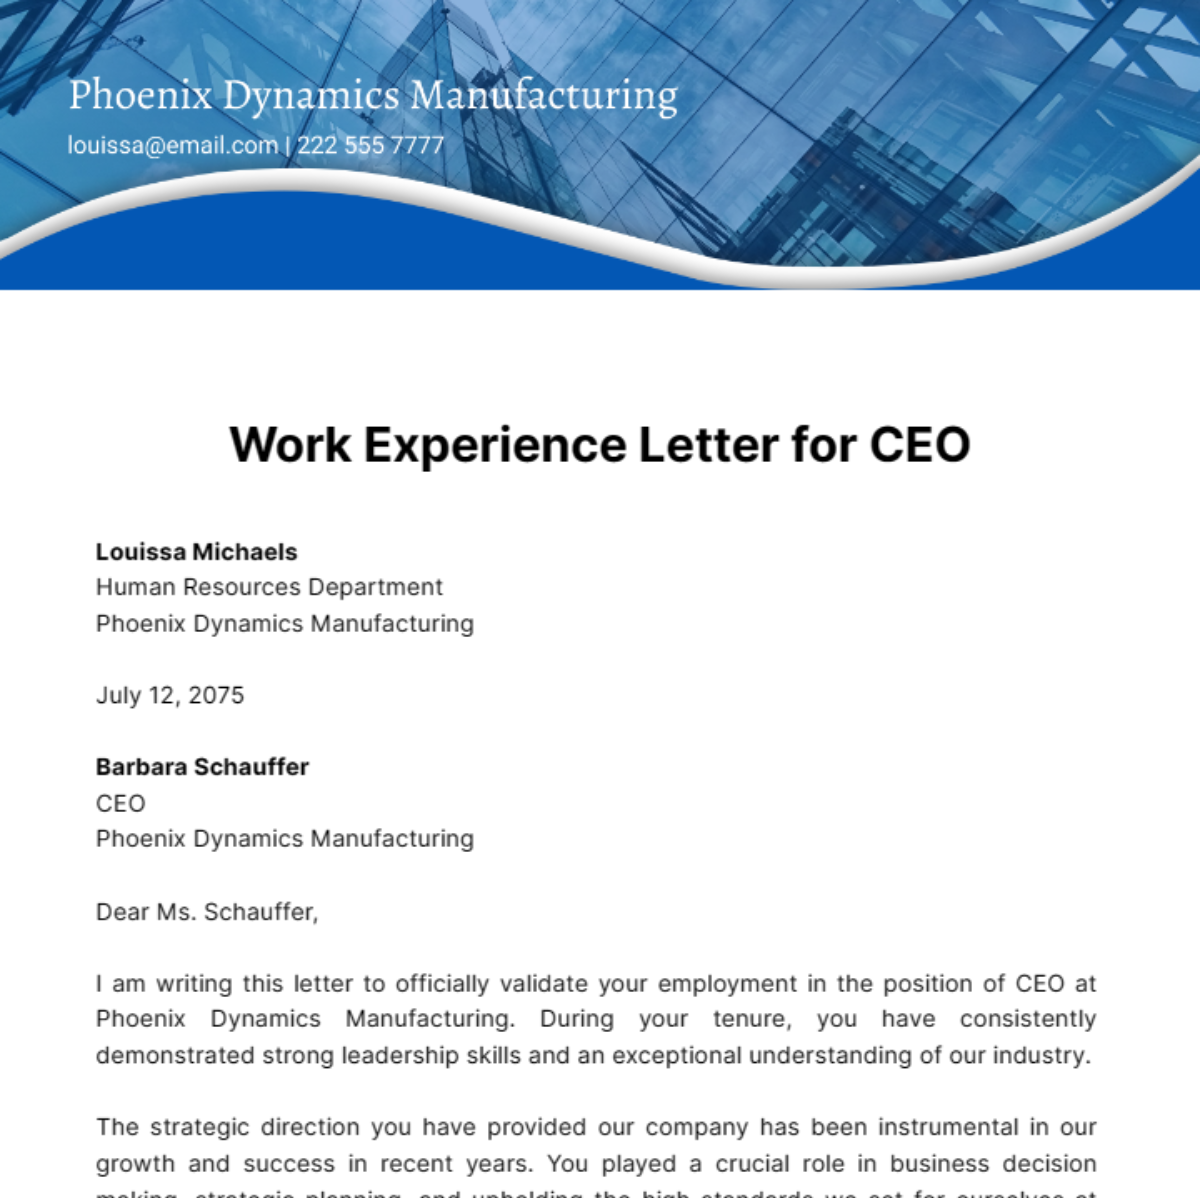 Work Experience Letter for CEO Template